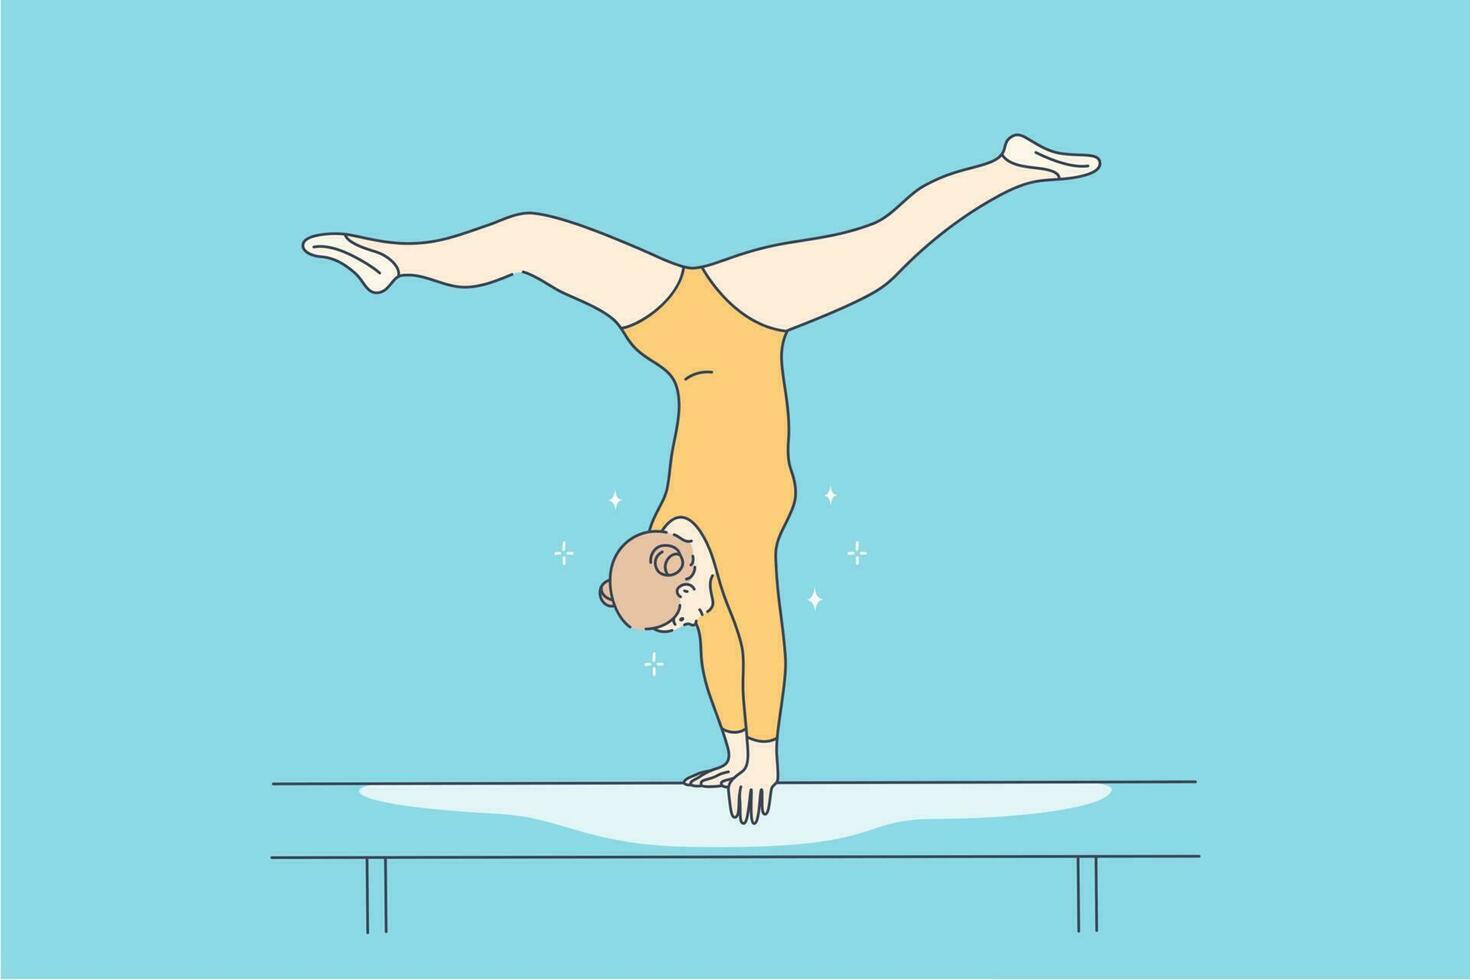 Sport, perfomance, gymnastics concept. Young professional woman girl gymnast cartoon character hand standing on balance beam balancing on tournament. Active lifestyle and flexibility illustration. vector